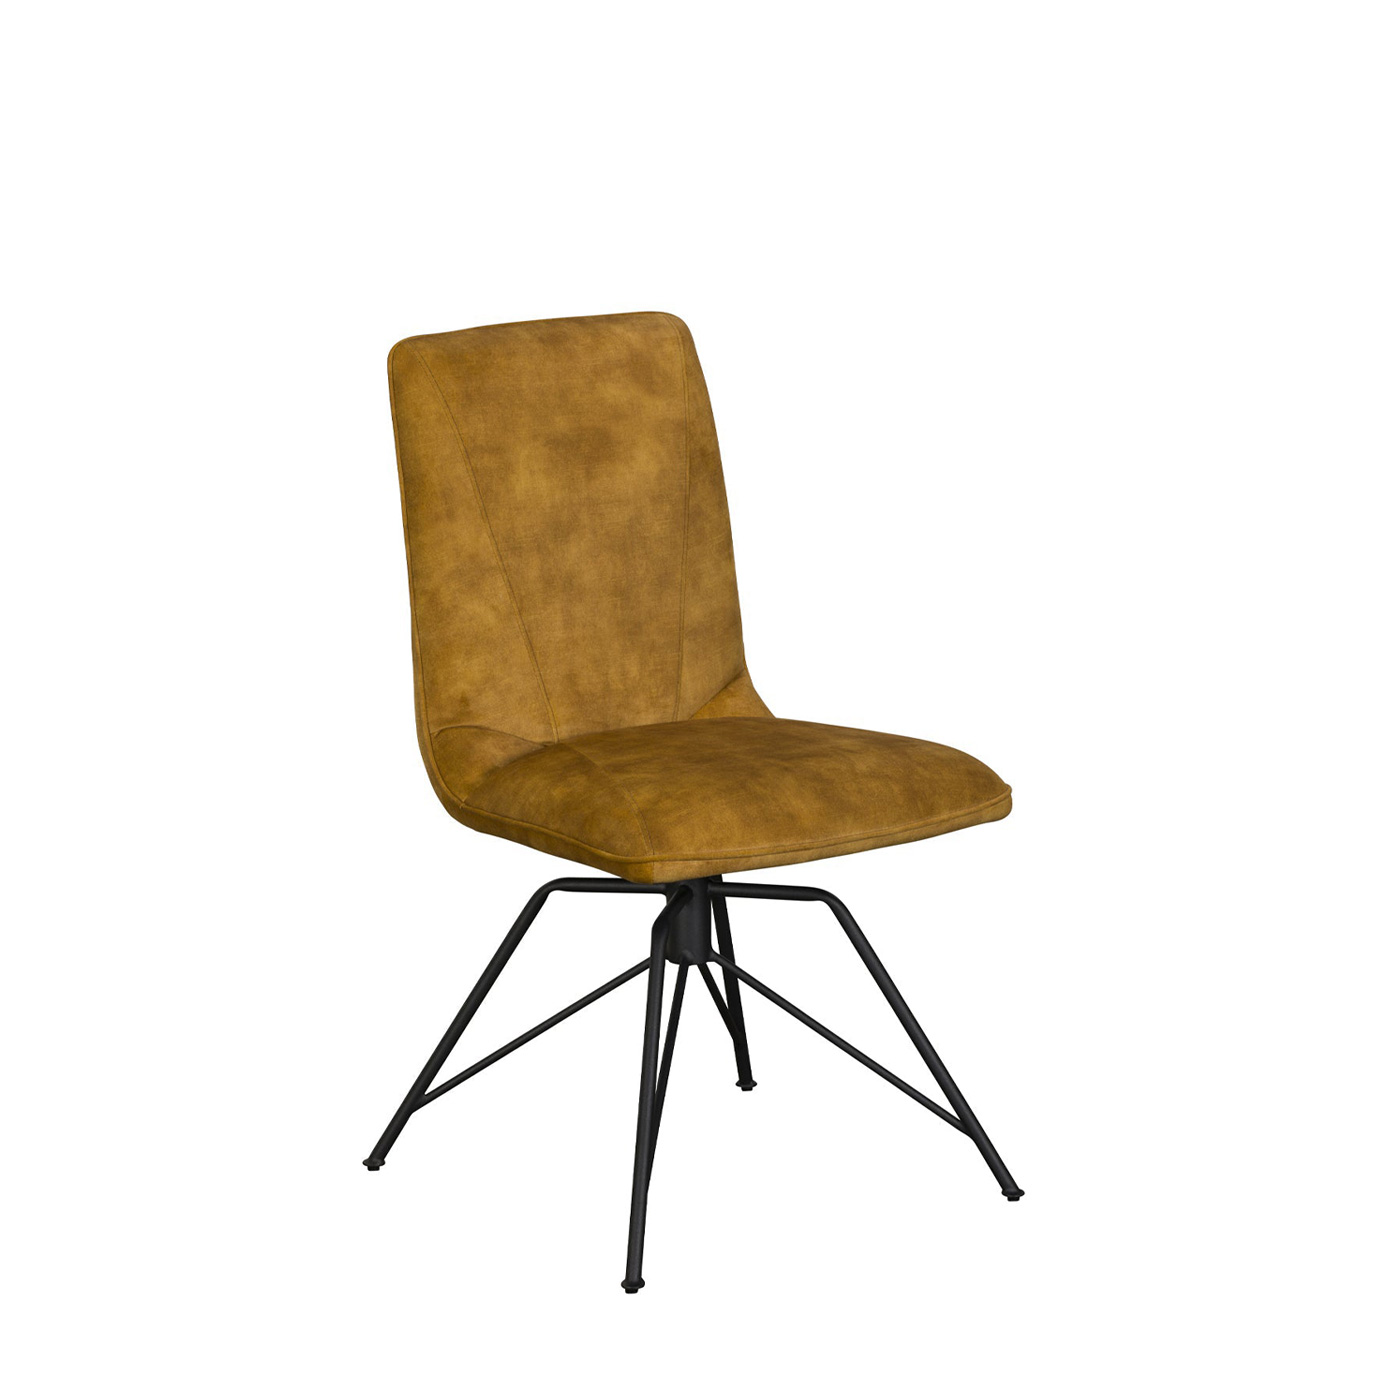 We Have 100's Dining Chairs On Display In Norwich & 100's More Online To choose From - Mix & Match